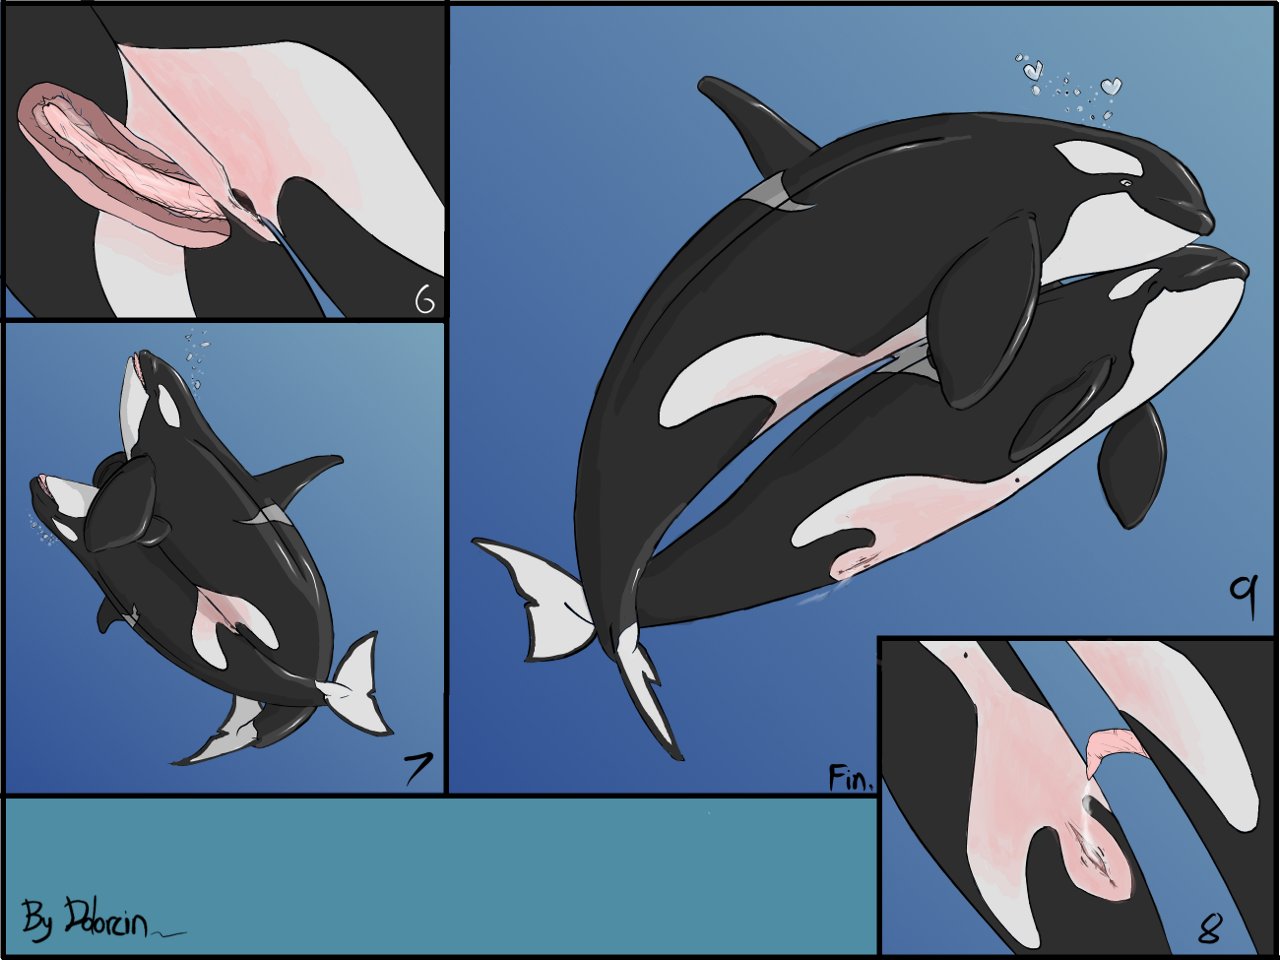 Do orcas have two dicks